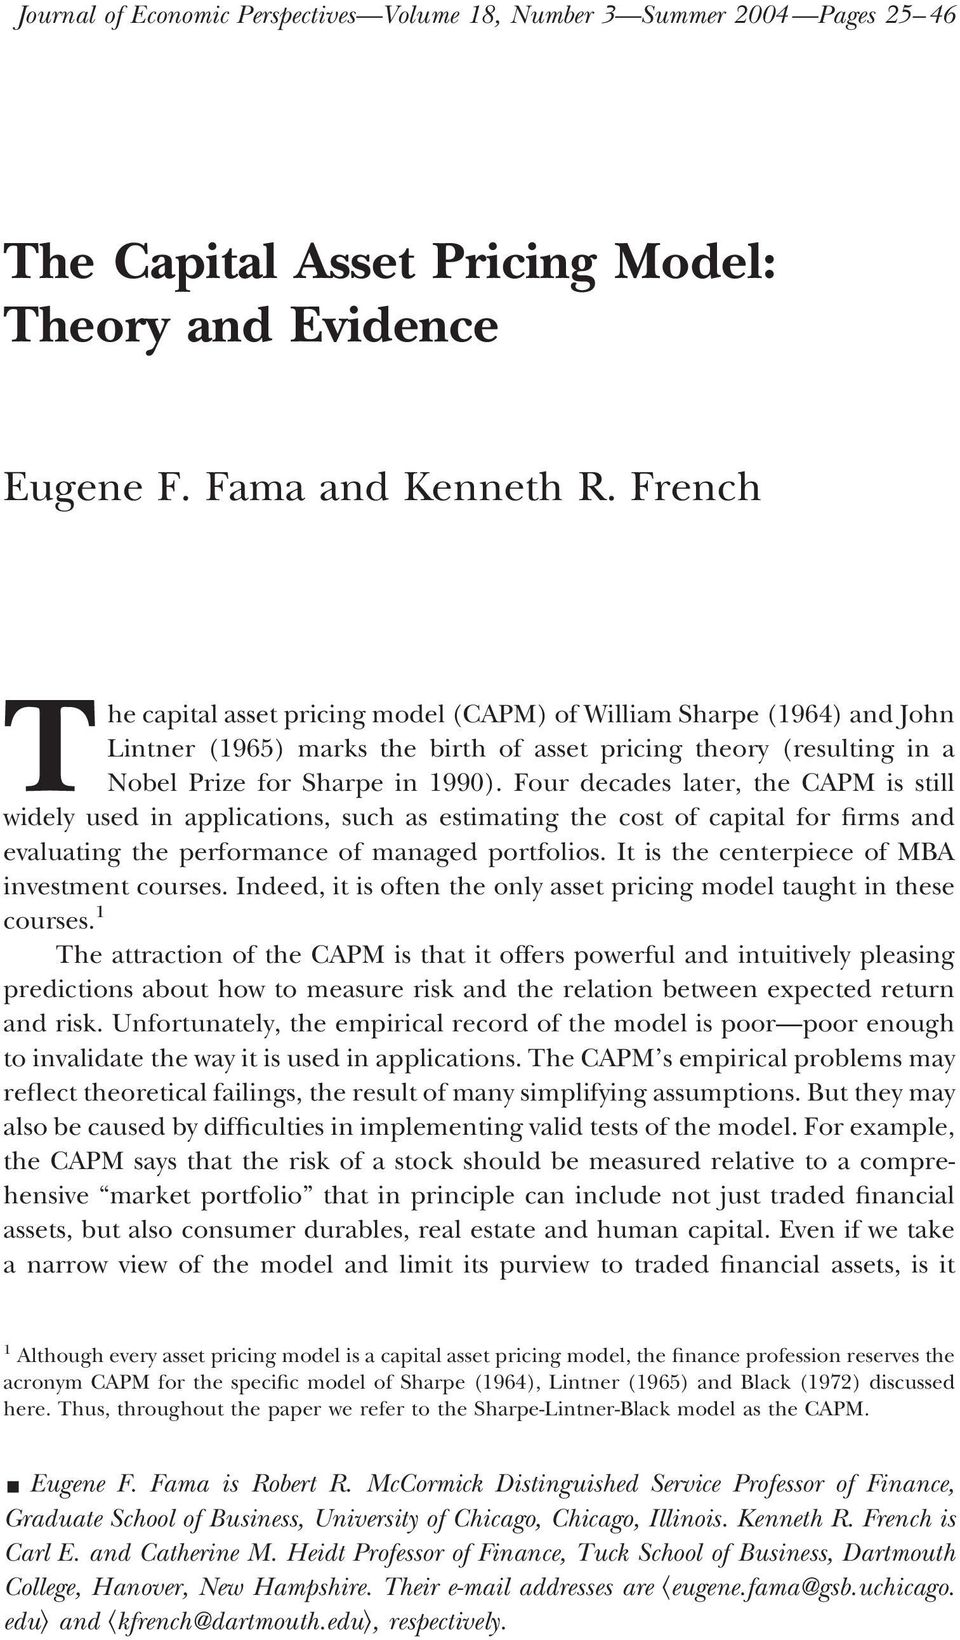 Four decades later, the CAPM is still widely used in applications, such as estimating the cost of capital for firms and evaluating the performance of managed portfolios.